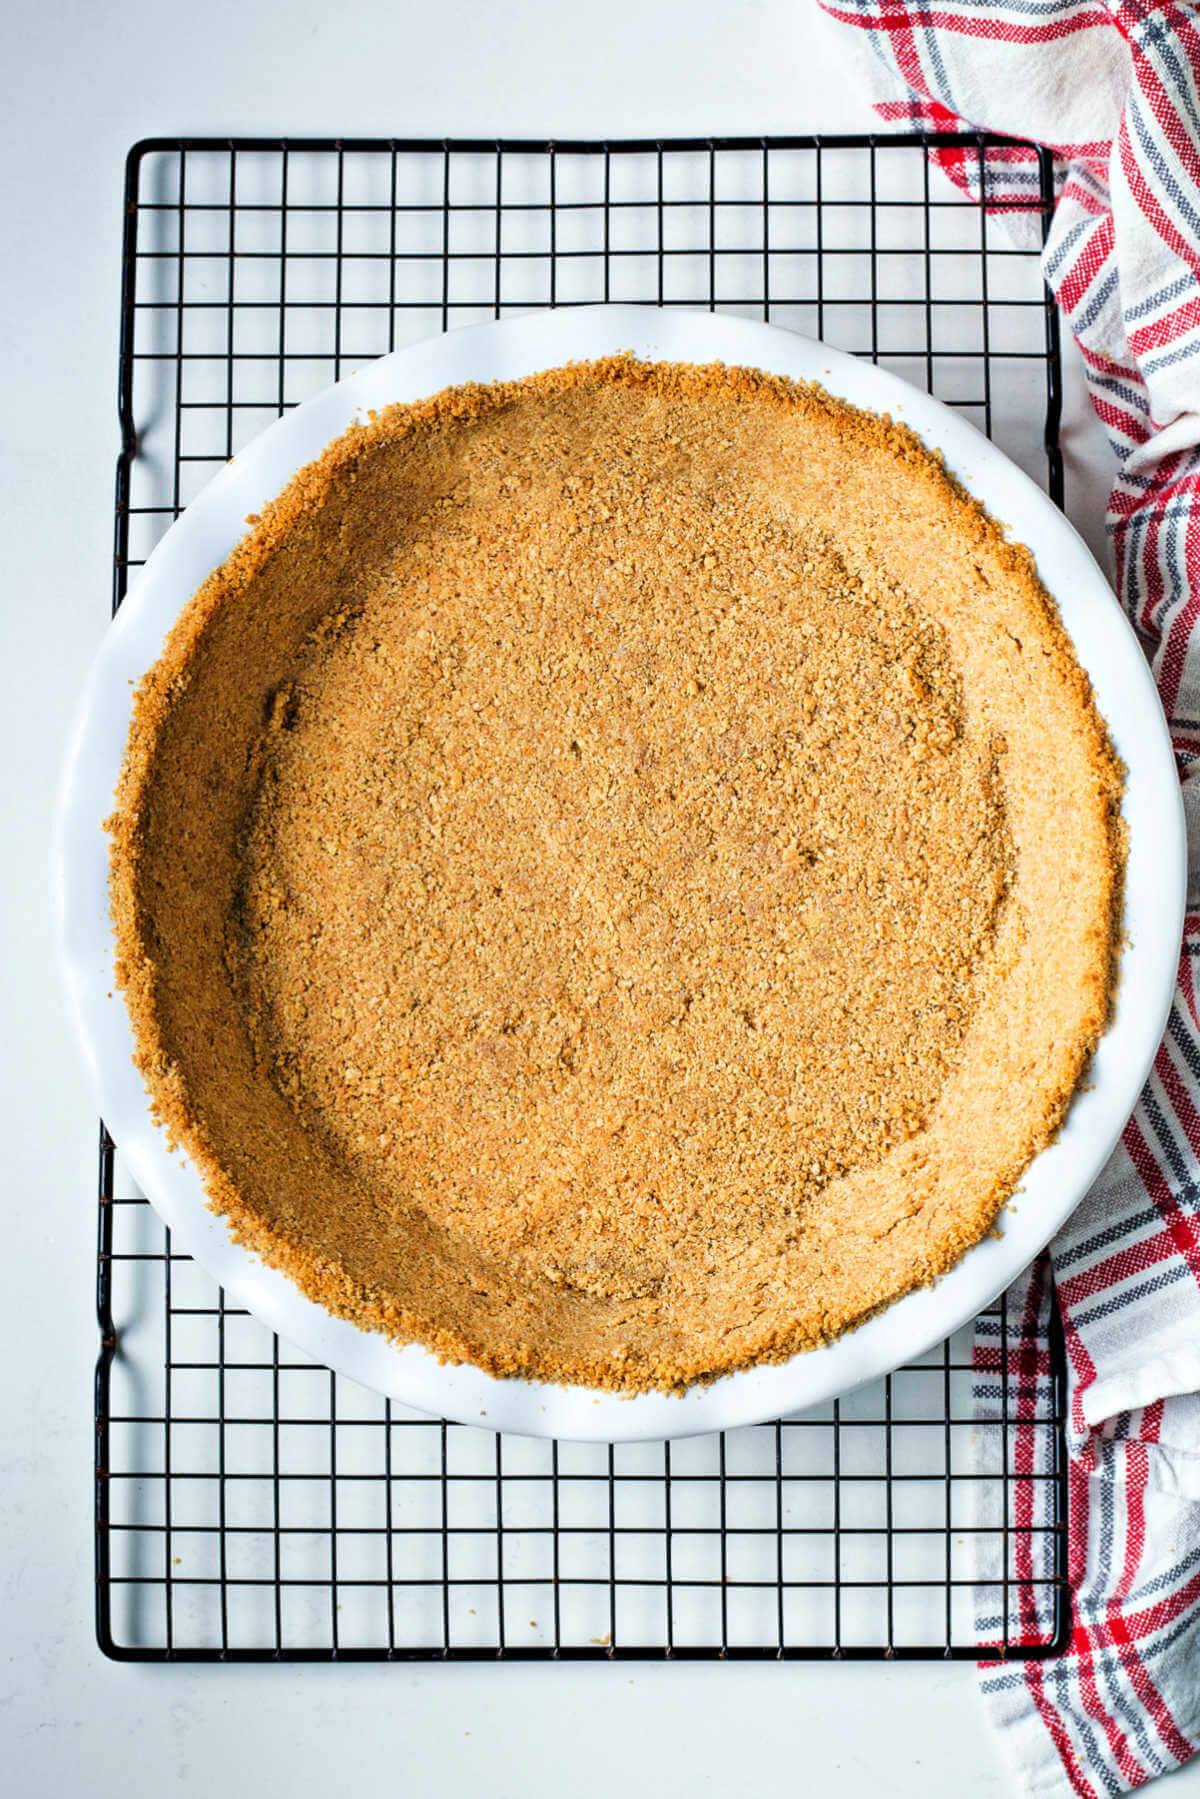 a baked graham cracker crust on a wire cooling rack.